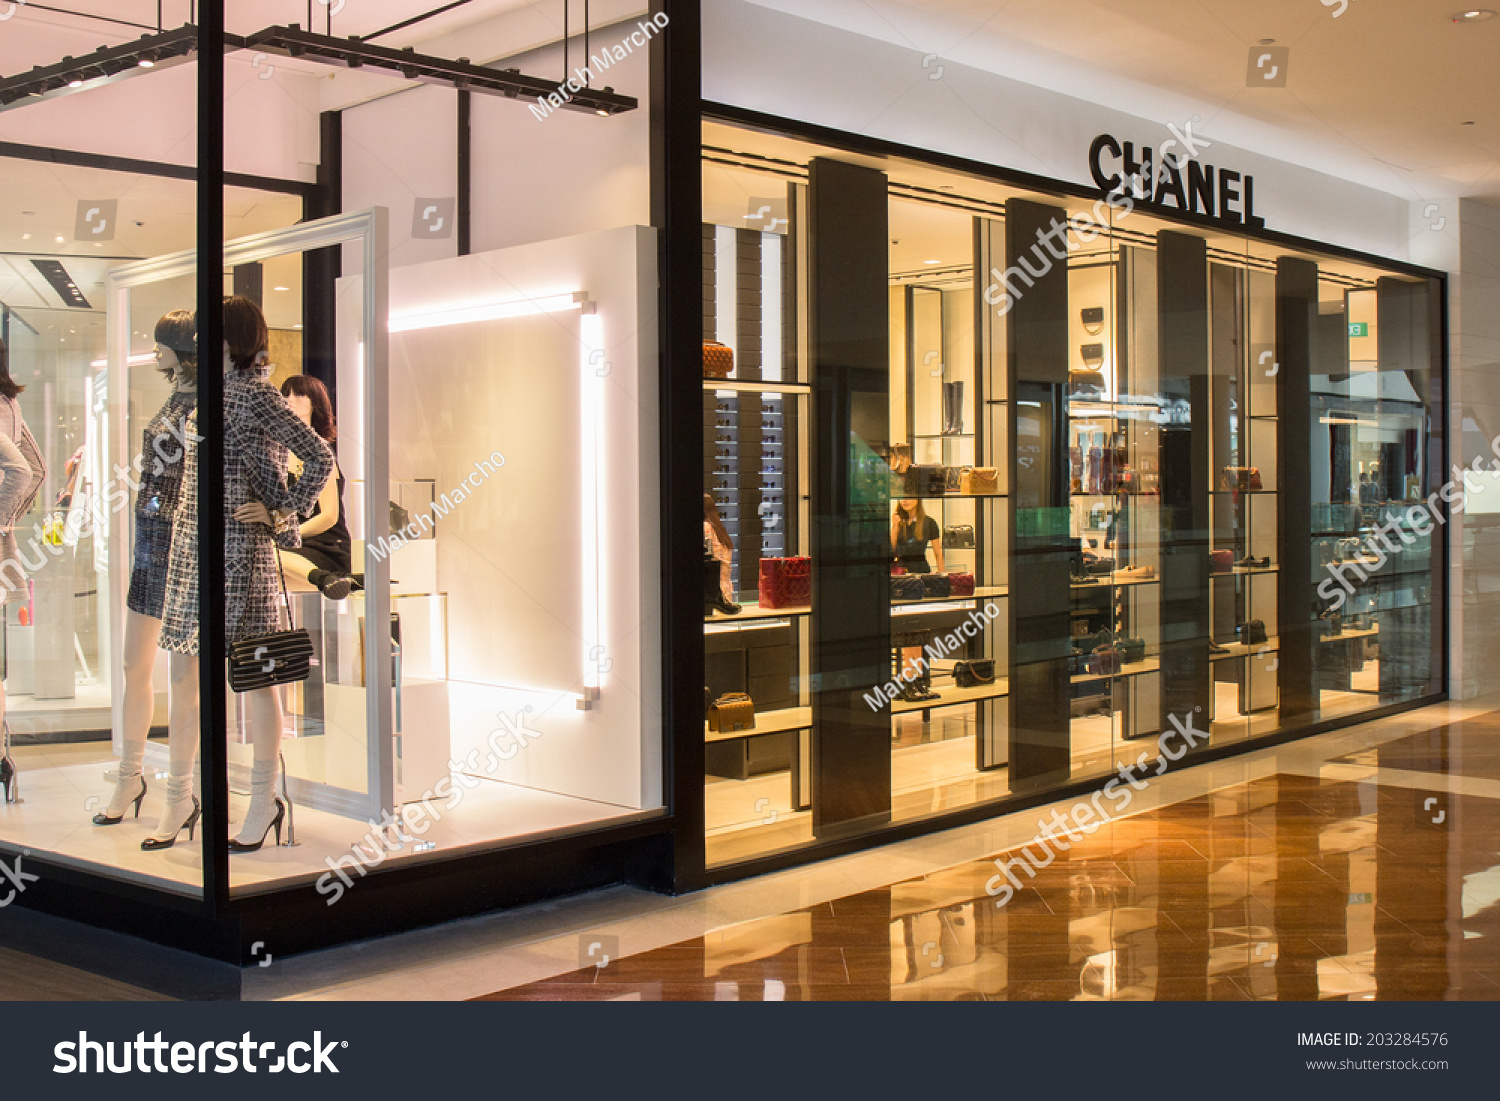 Singapore - June 19: Chanel Store In Marina Bay Sands Shopping Mall ...